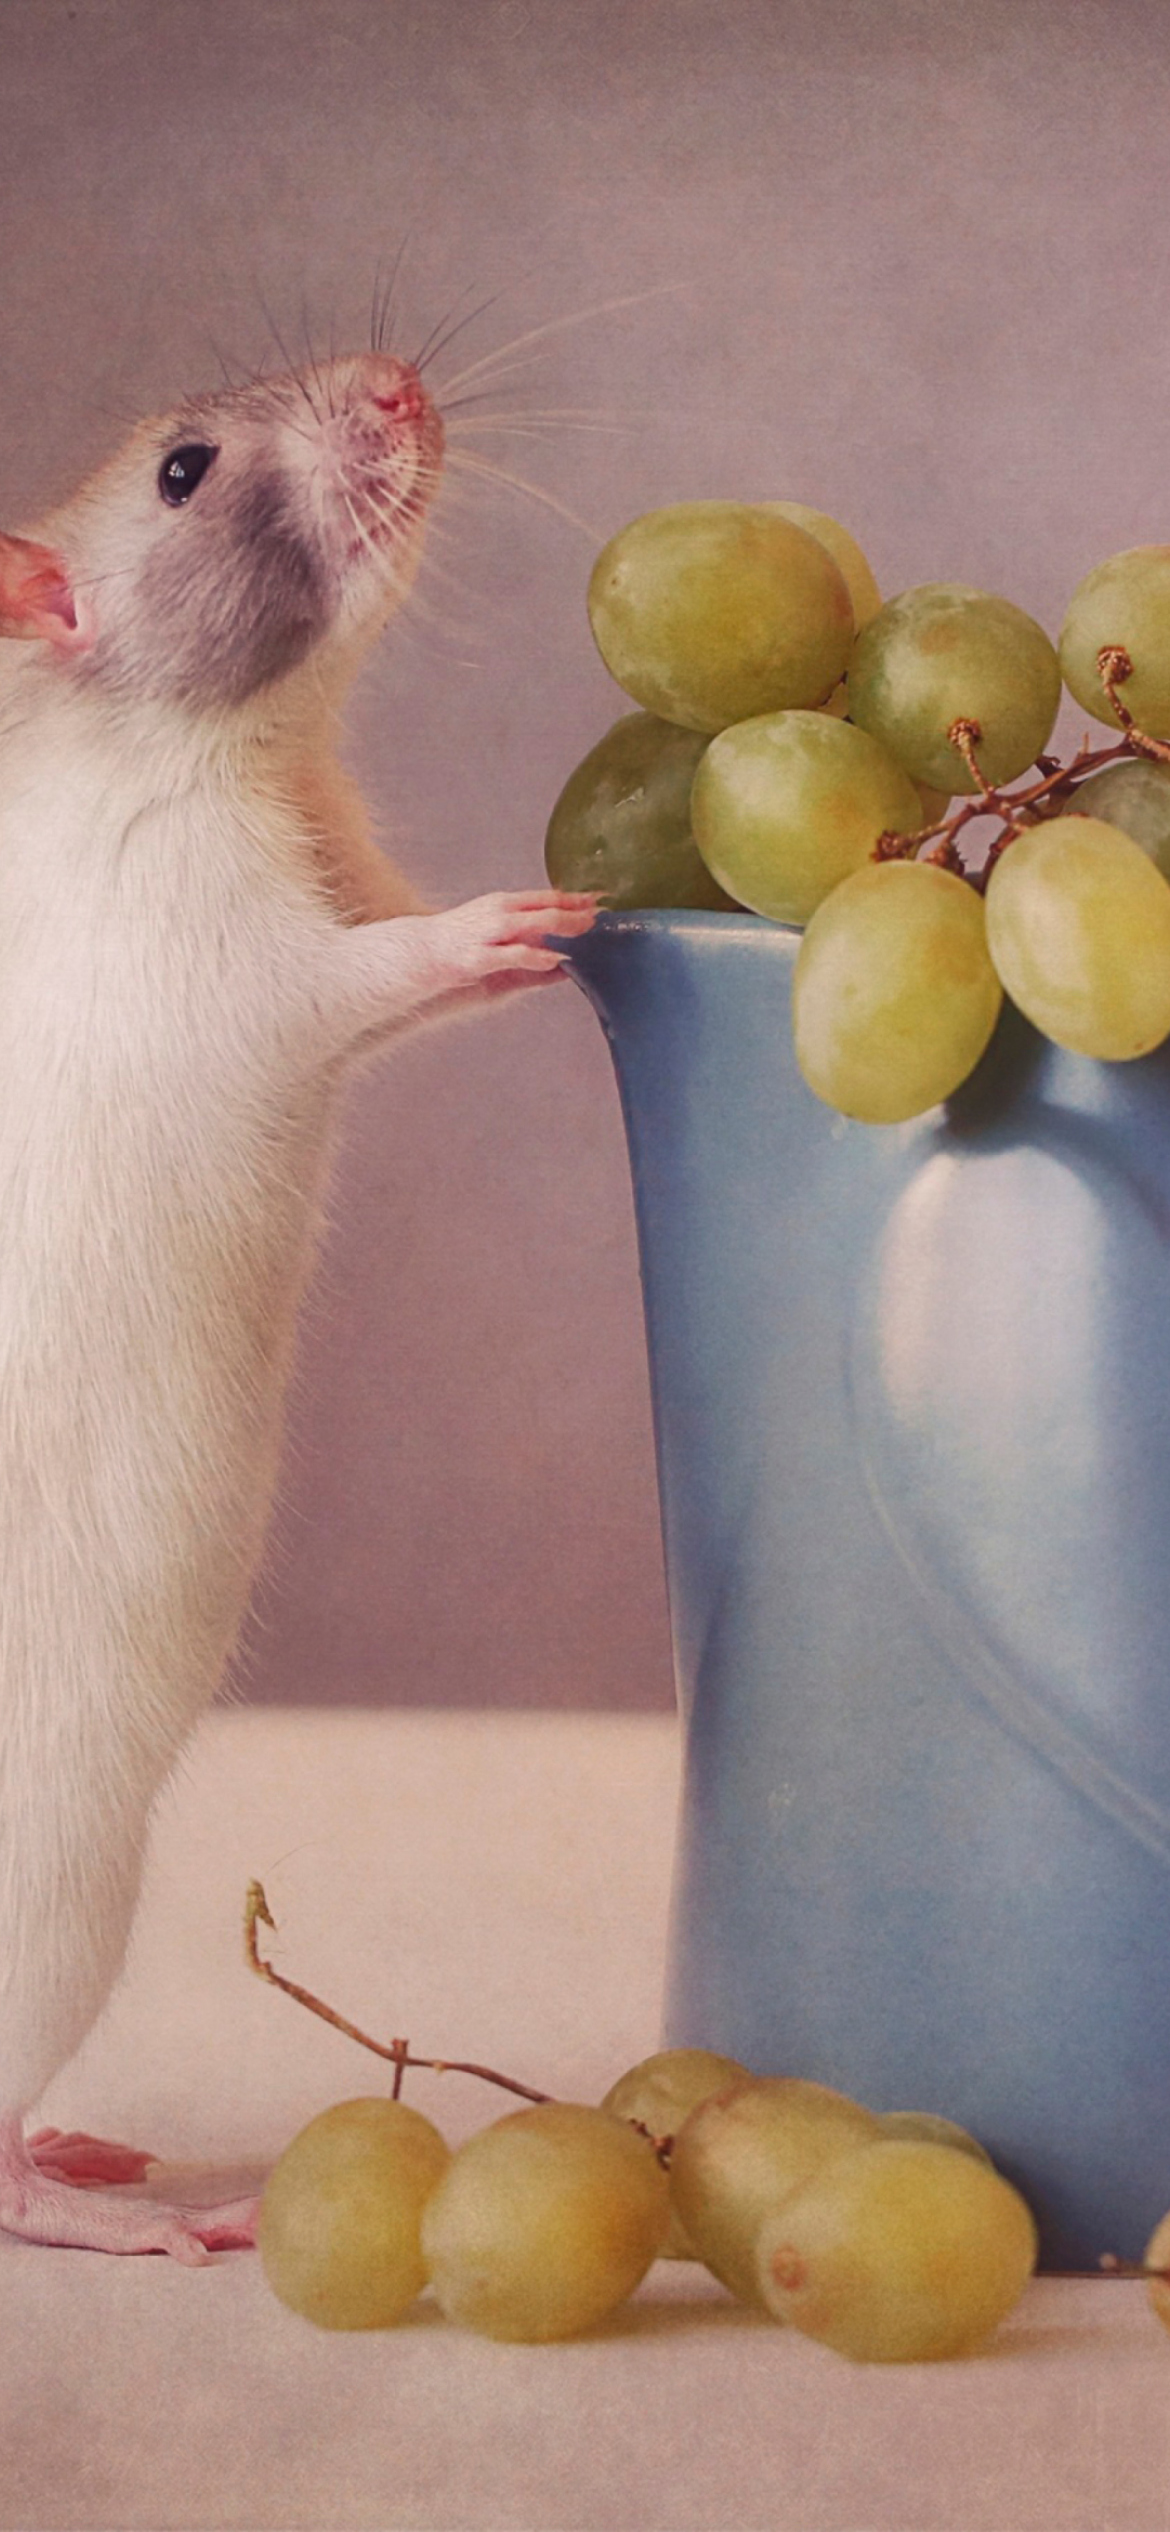 Mouse Loves Grapes wallpaper 1170x2532